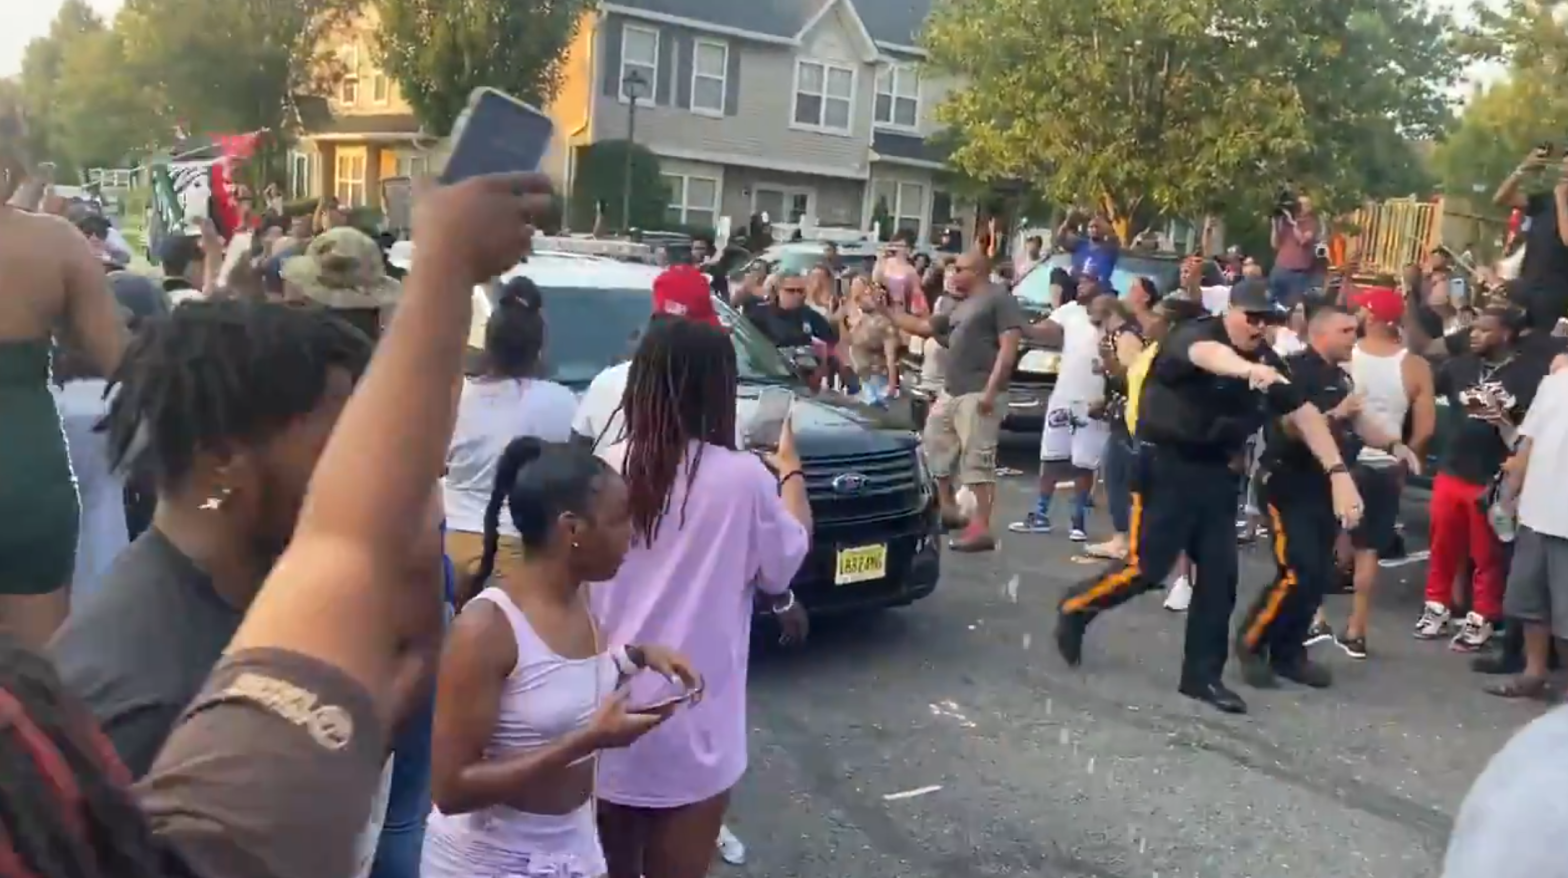 Officers clear a path for a police vehicle containing Edward Cagney  Mathews, under arrest on charges of bias intimidation and trespassing, after protesters surrounded his residence on July 5. (Screenshot: Danny Freeman / NBC Philadelphia / Twitter, Fair Use)